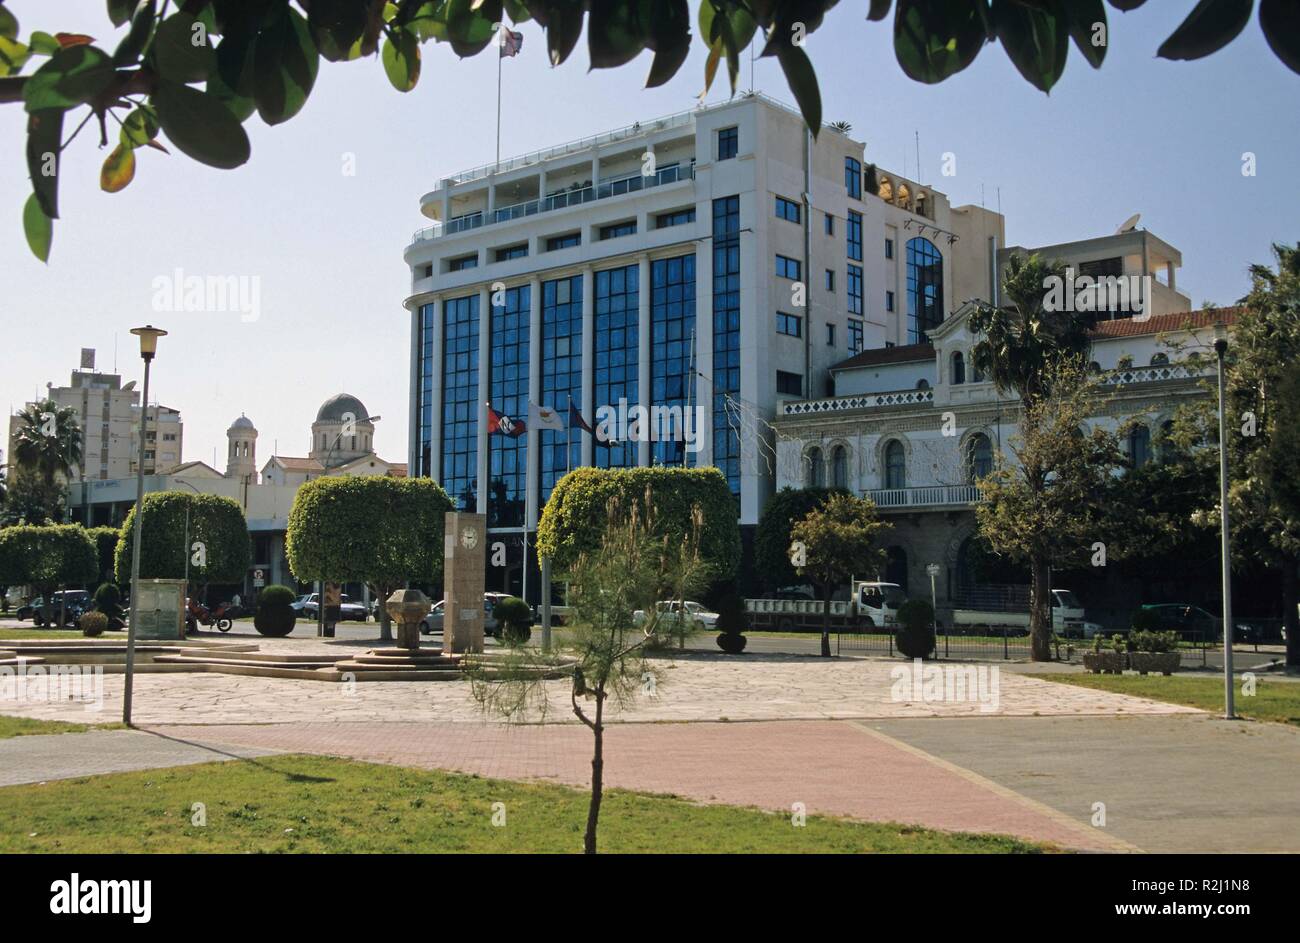 alpha bank in limassol Stock Photo